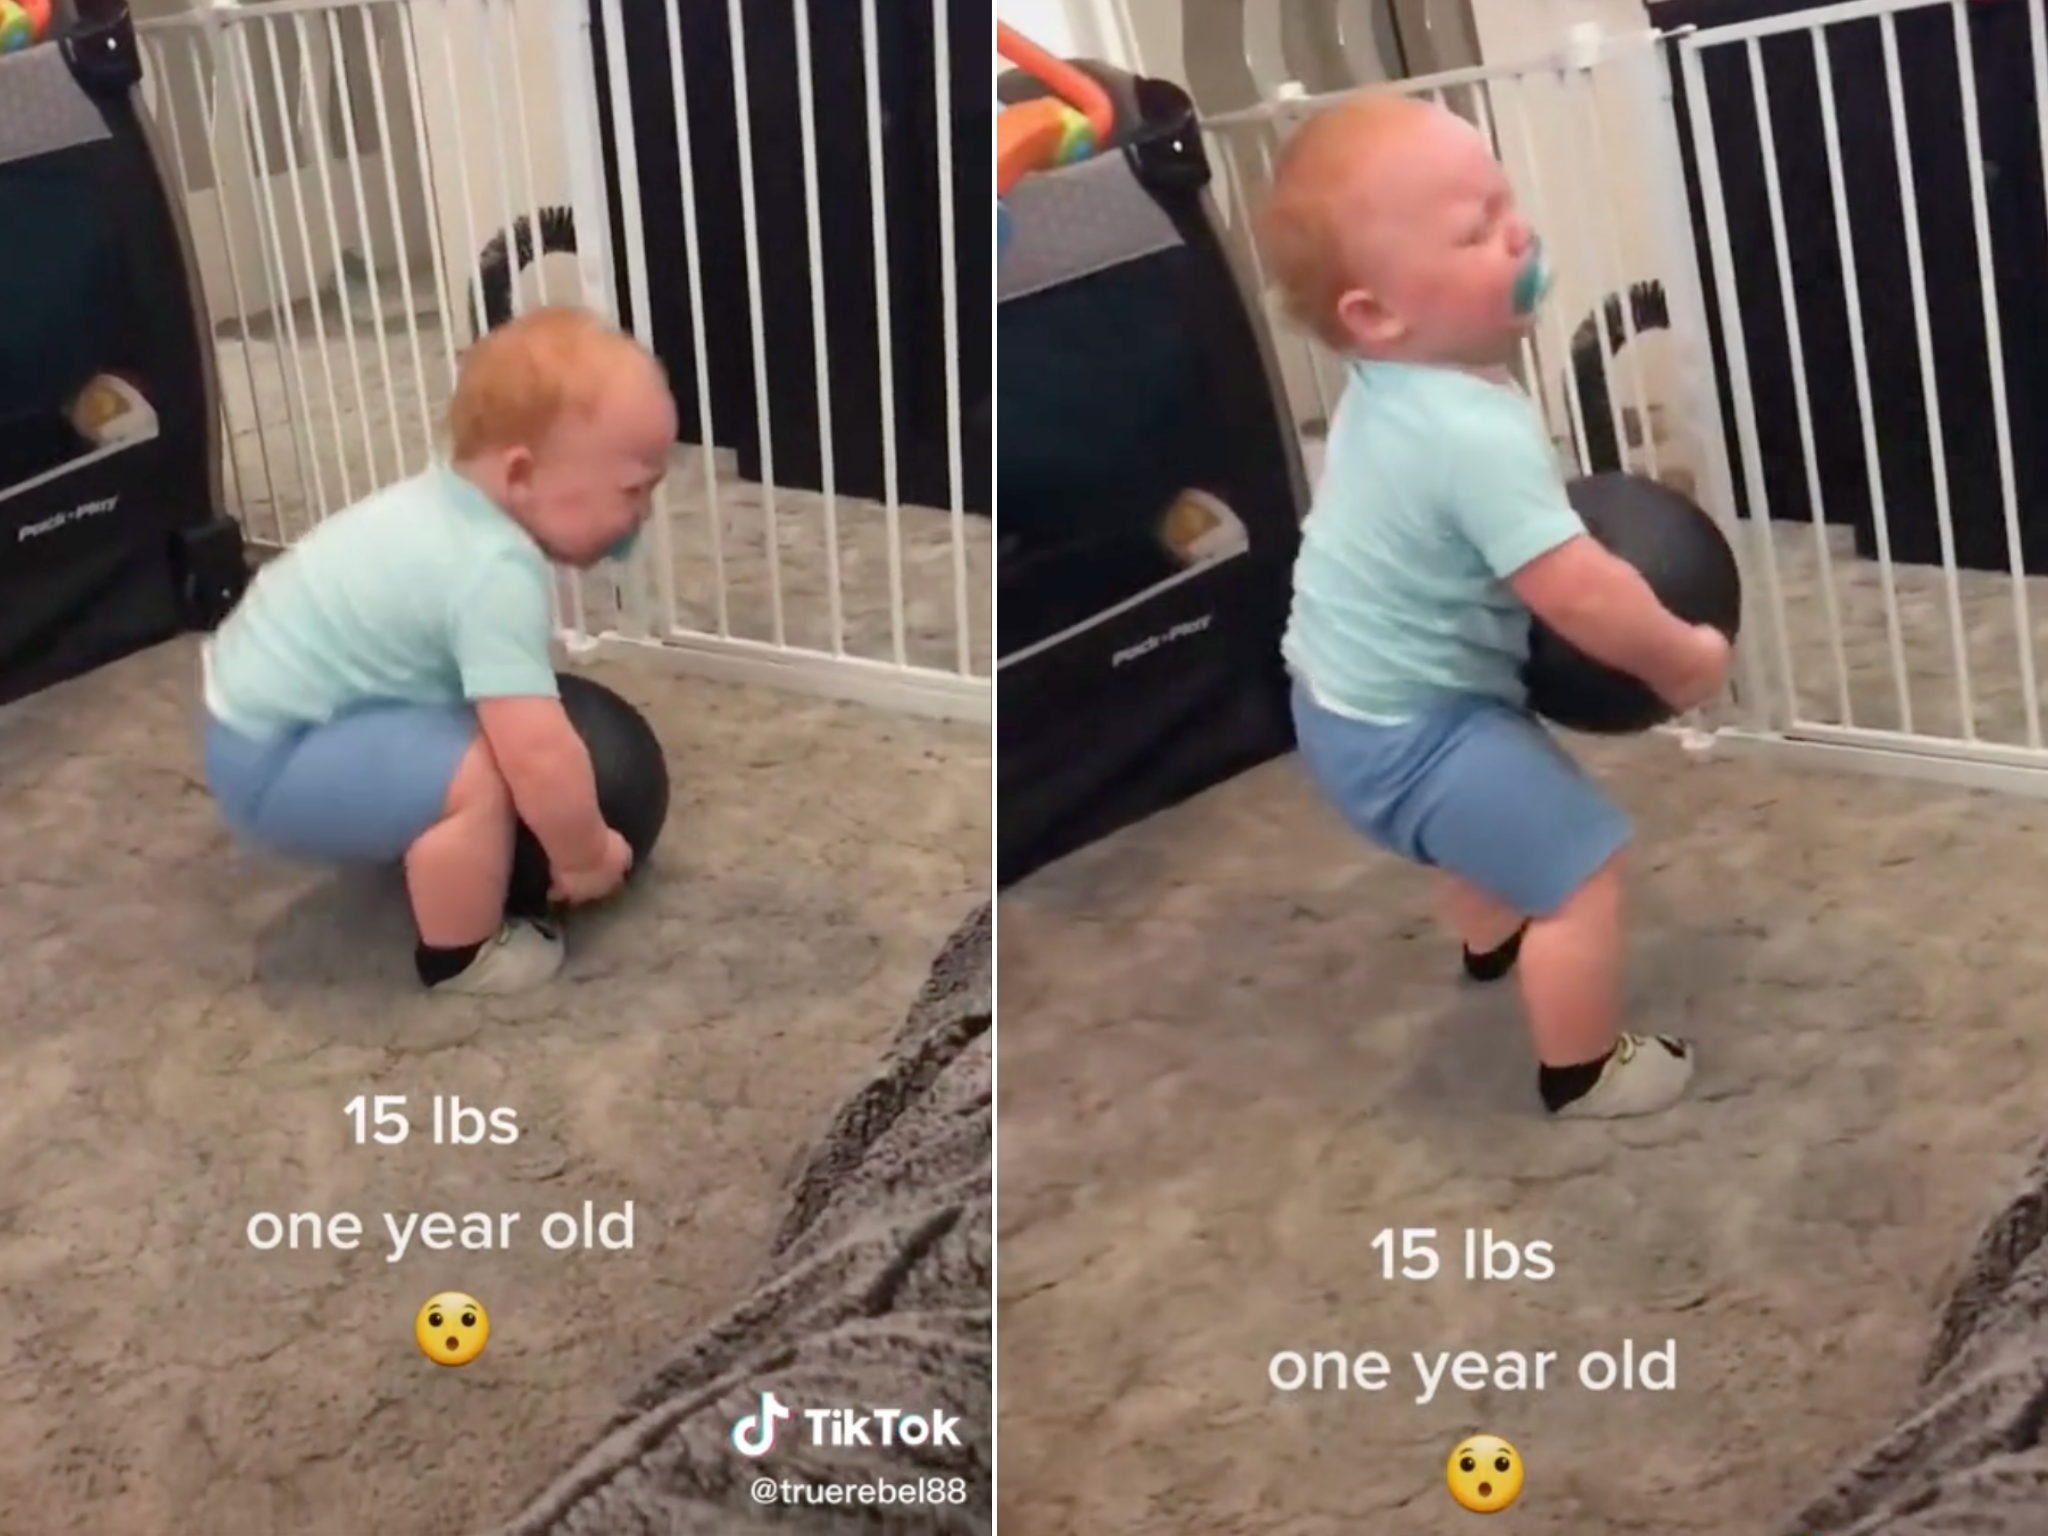 Super-strong 1-year-old picks up 15lb ball and stuns the internet | indy100